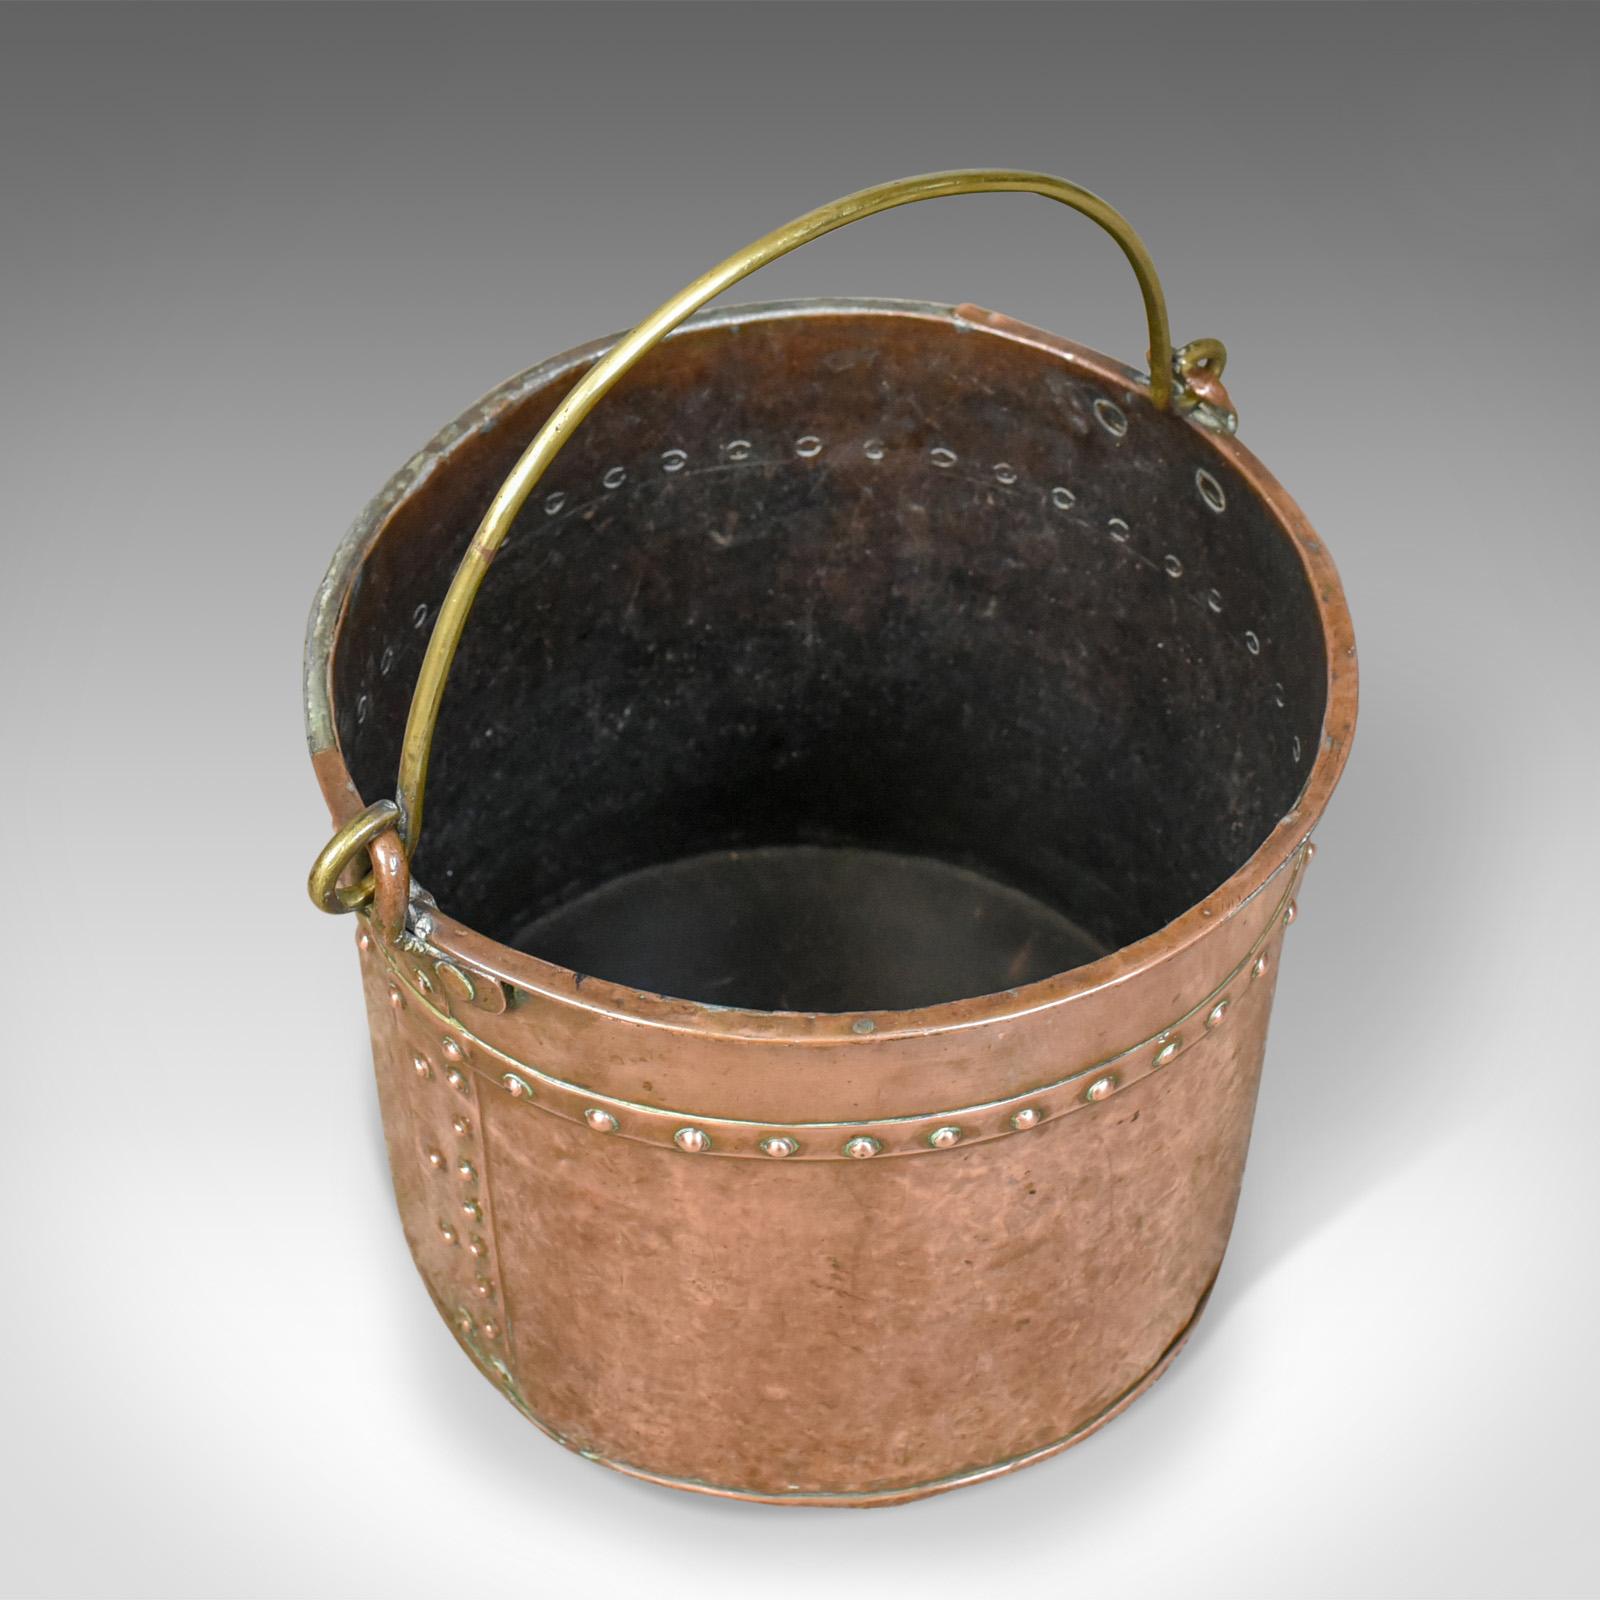 This is an antique copper coal bucket, an English, Victorian, fireside scuttle dating to the mid-19th century, circa 1850.

A pleasing fireside storage bin presented in good antique condition
Suitable for coal, logs and kindling or helpful when